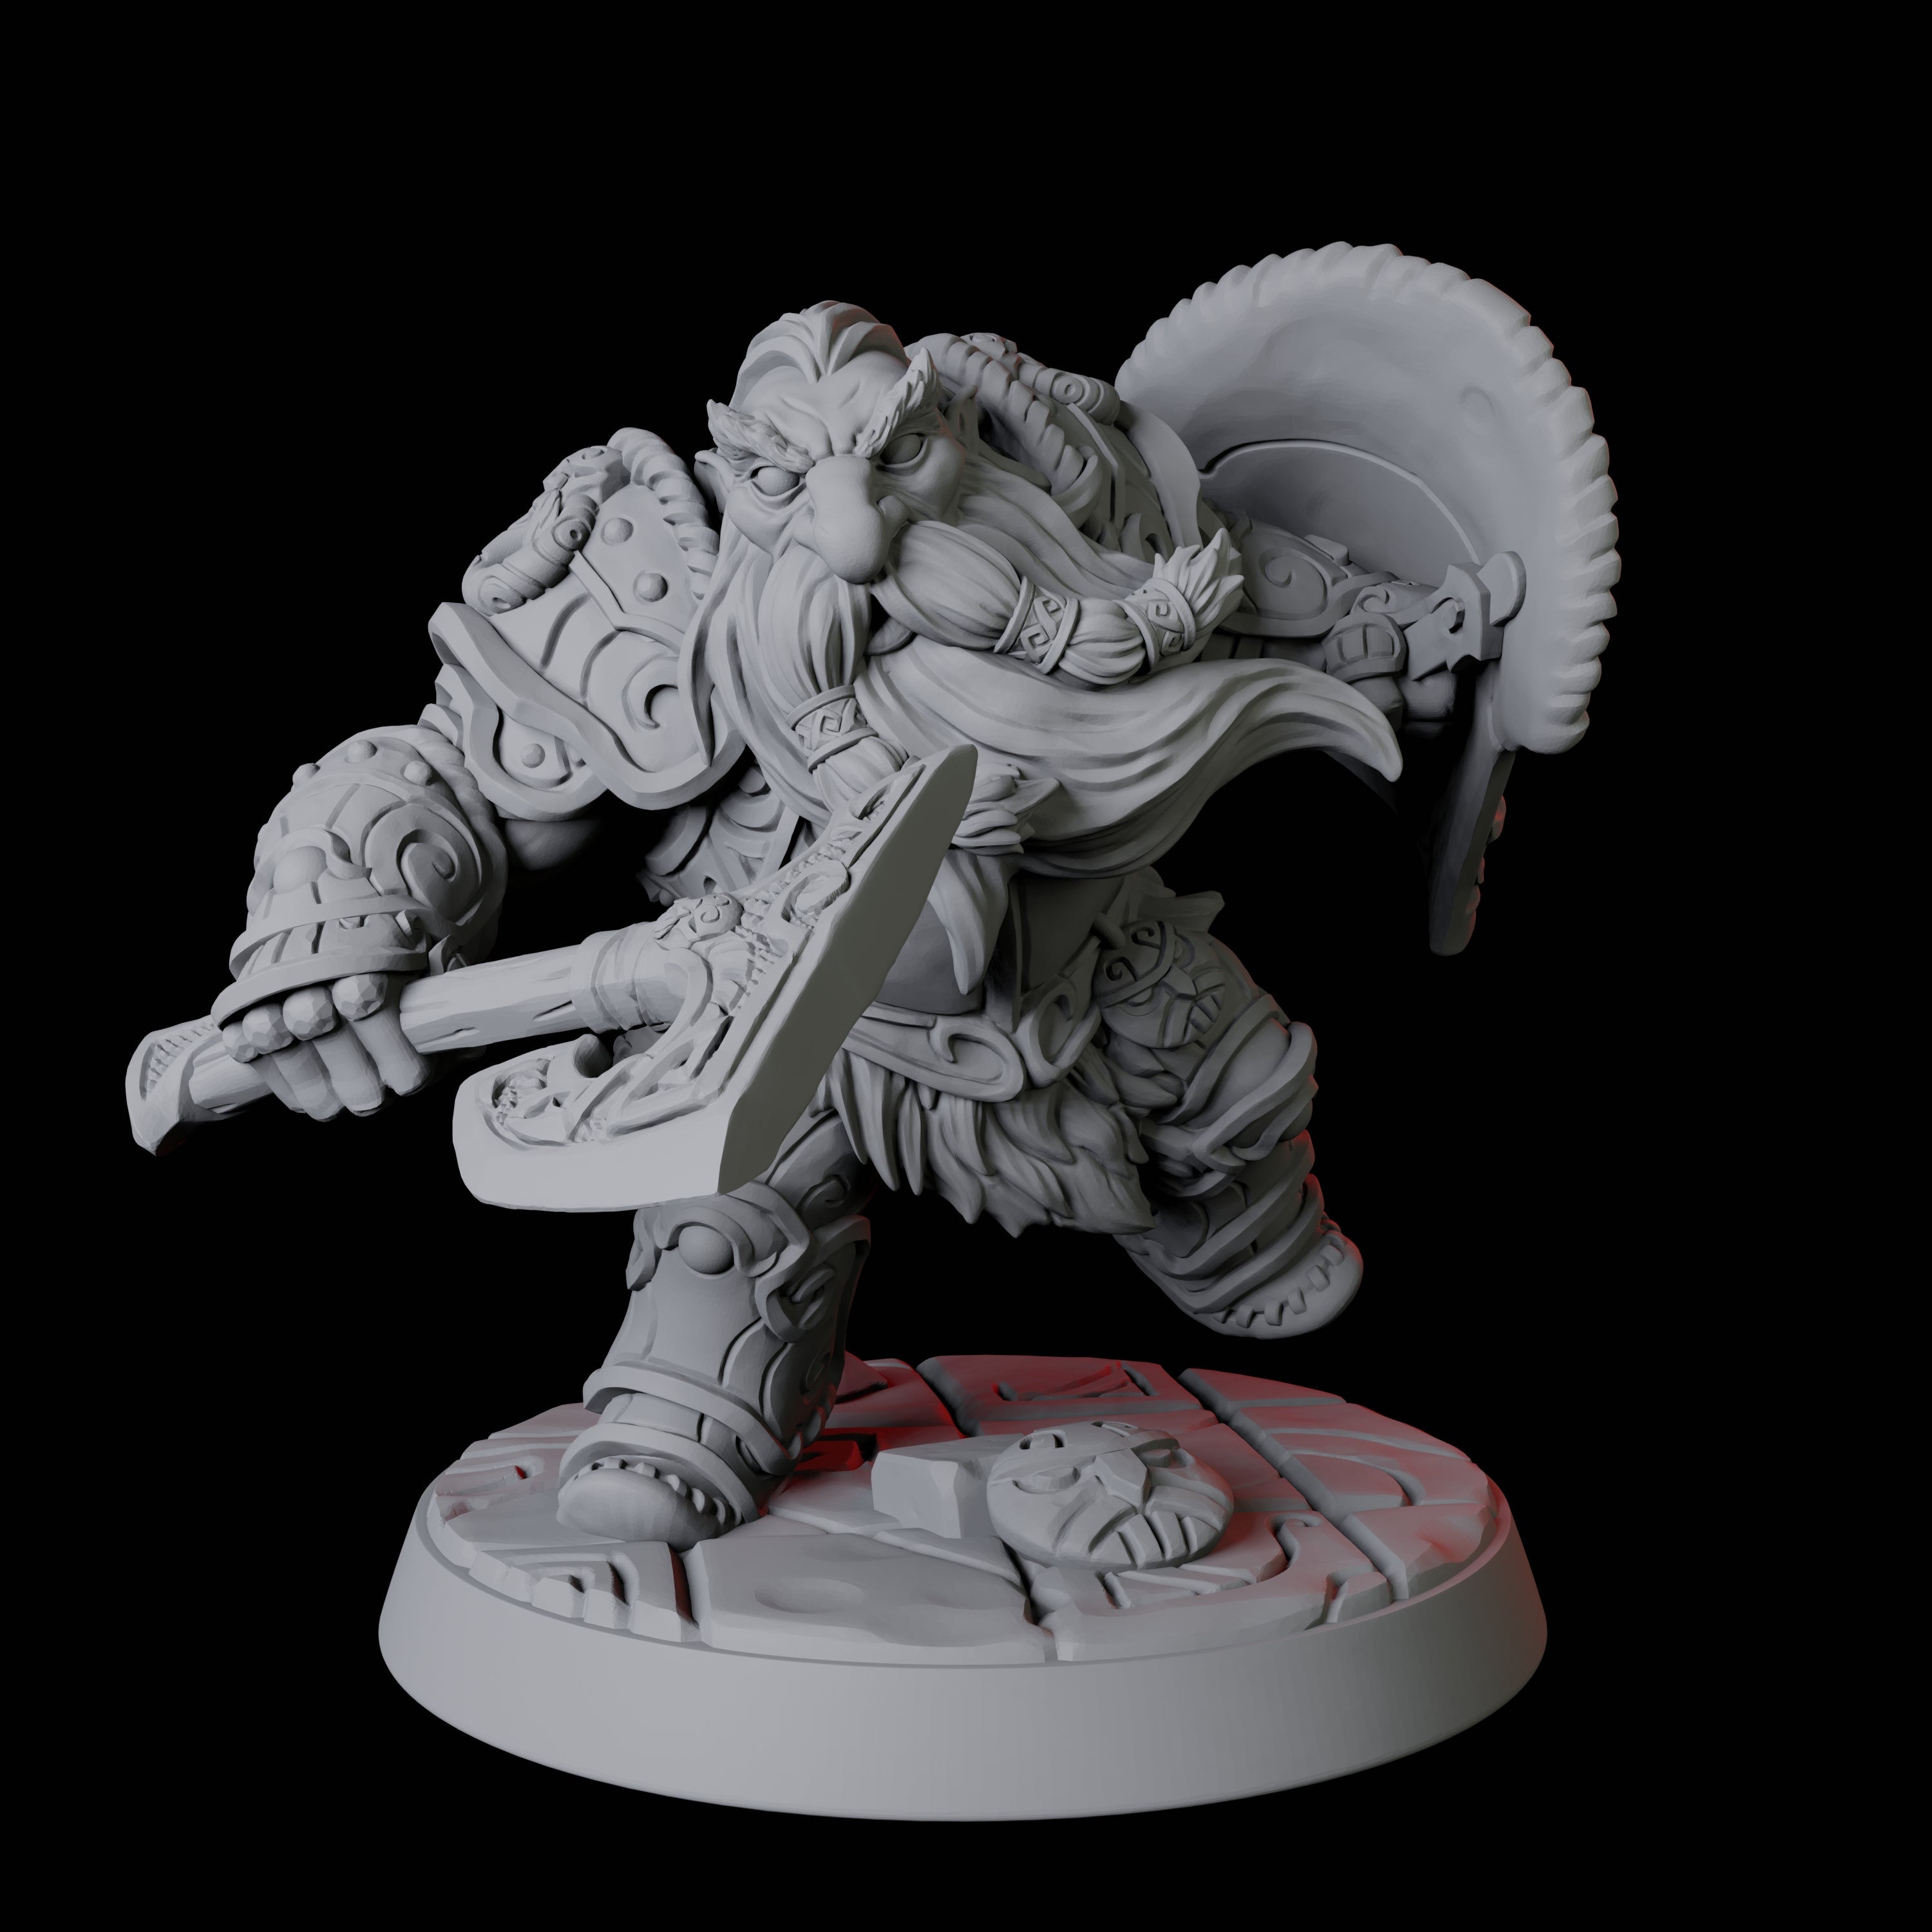 City Guard Dwarf A Miniature for Dungeons and Dragons, Pathfinder or other TTRPGs